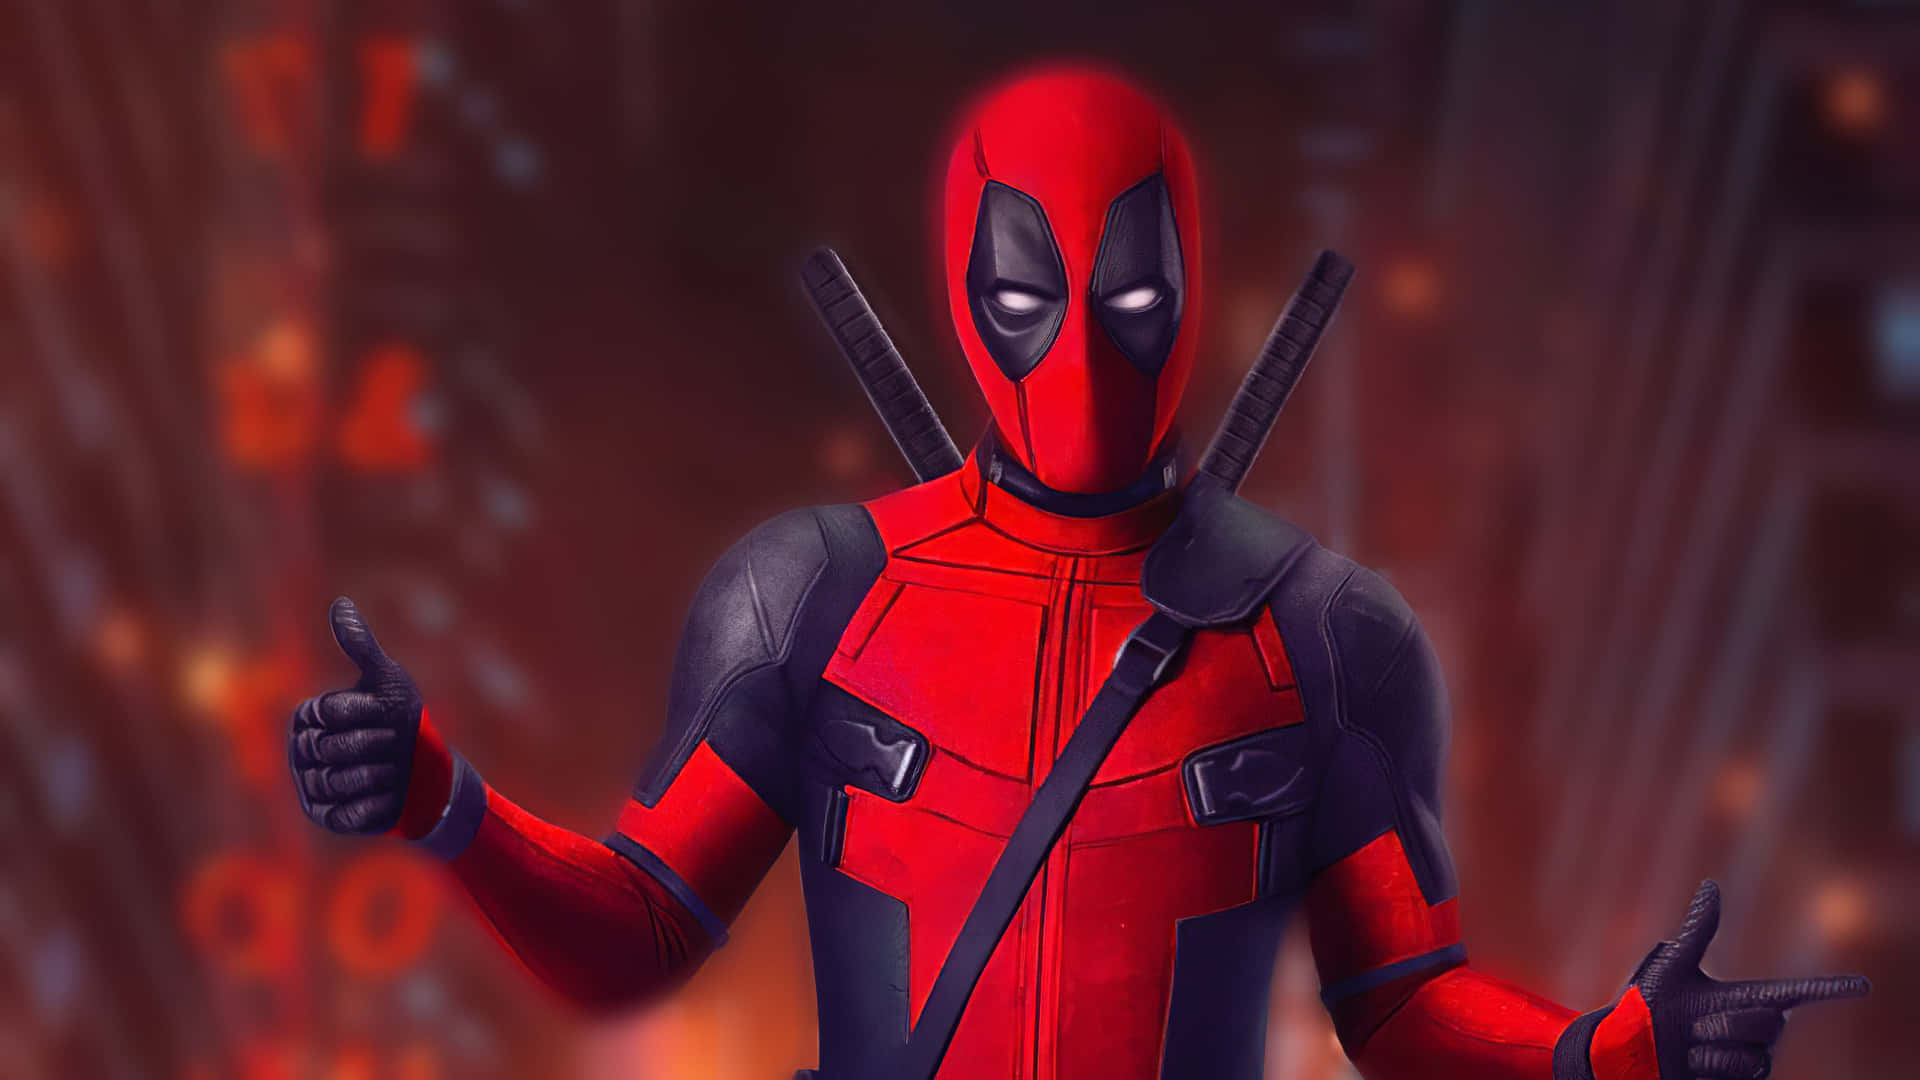 Deadpool Background Illustration Thumbs-Up And Pointing